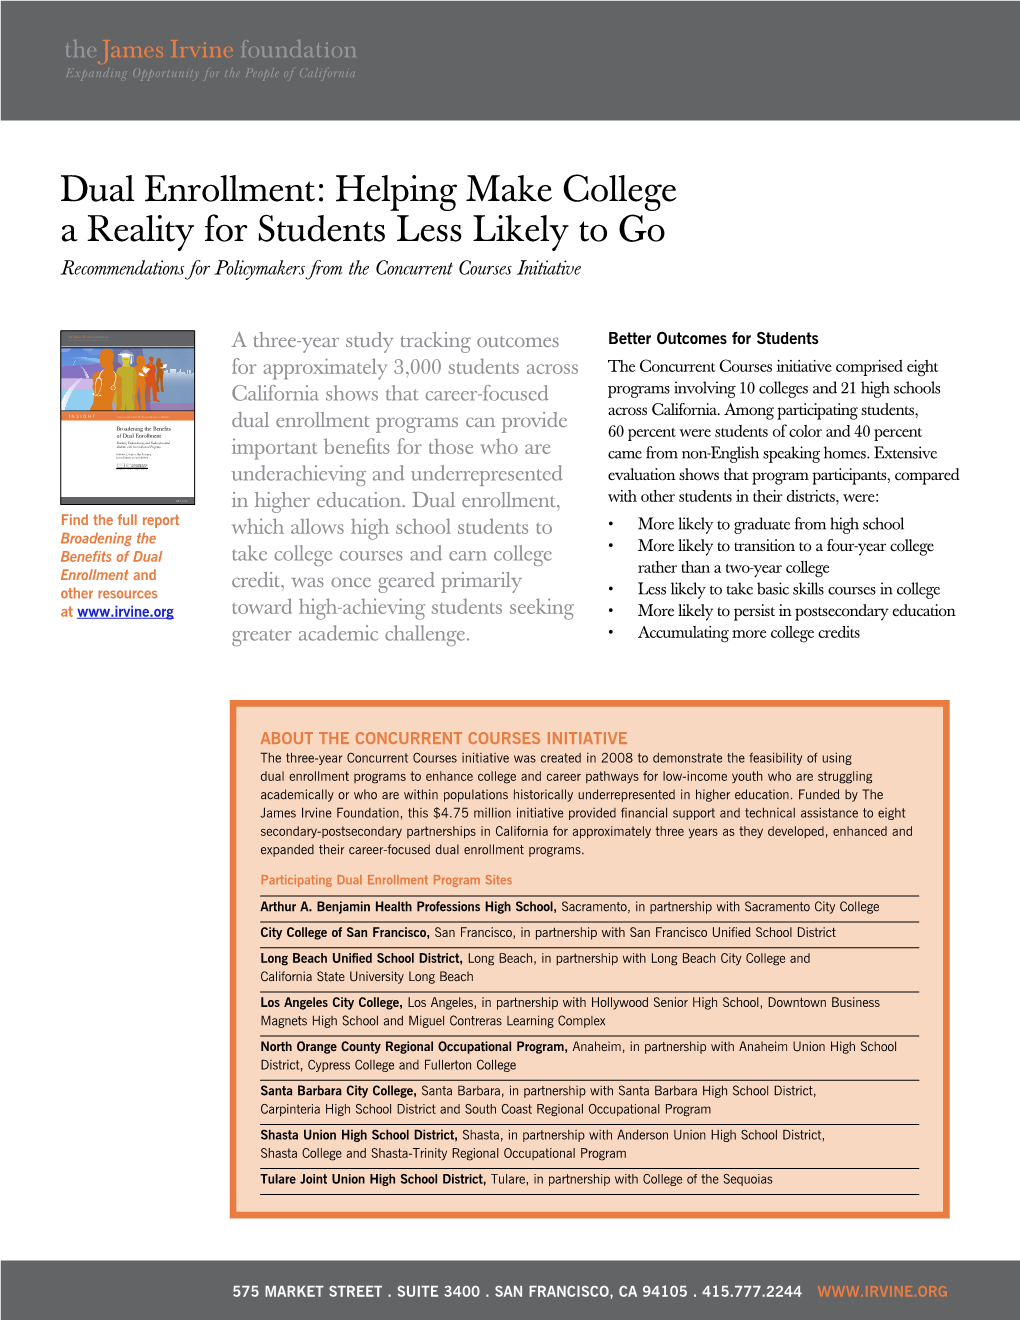 Dual Enrollment: Helping Make College a Reality for Students Less Likely to Go Recommendations for Policymakers from the Concurrent Courses Initiative